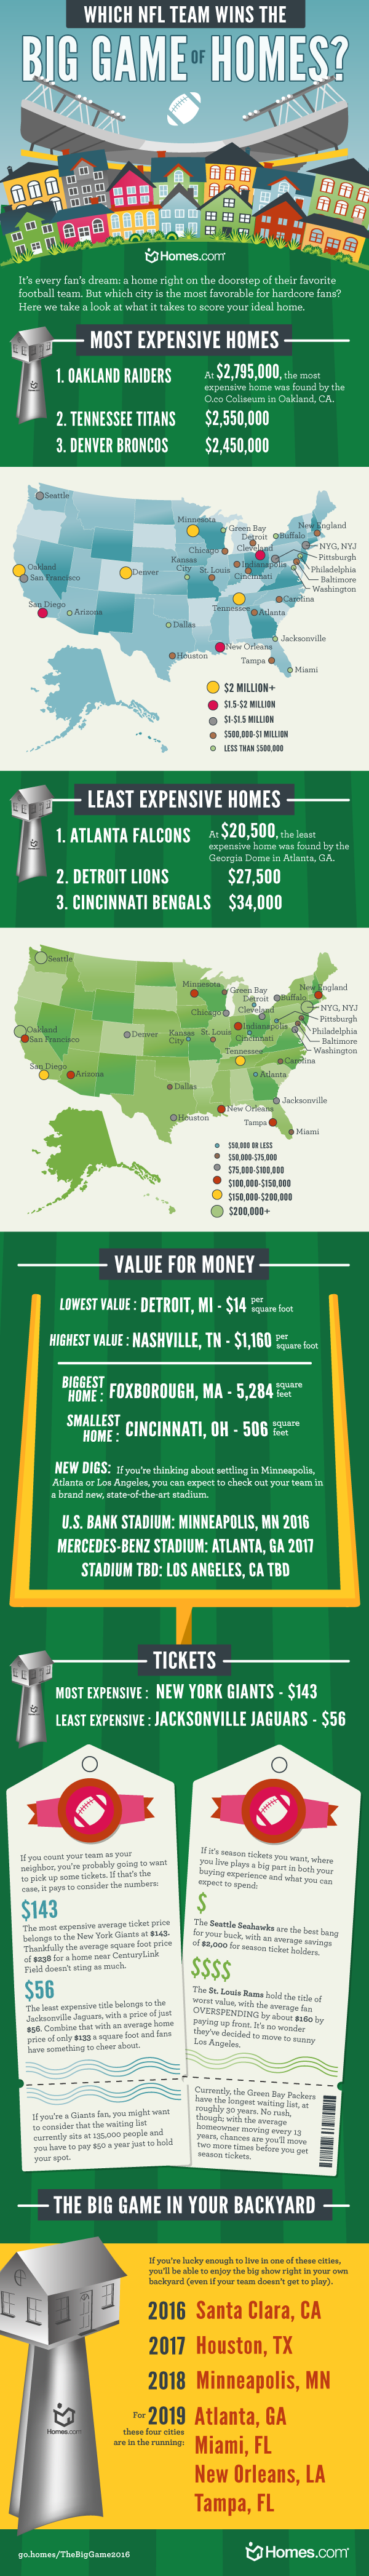 NFL Stadiums and the Cost of Homes